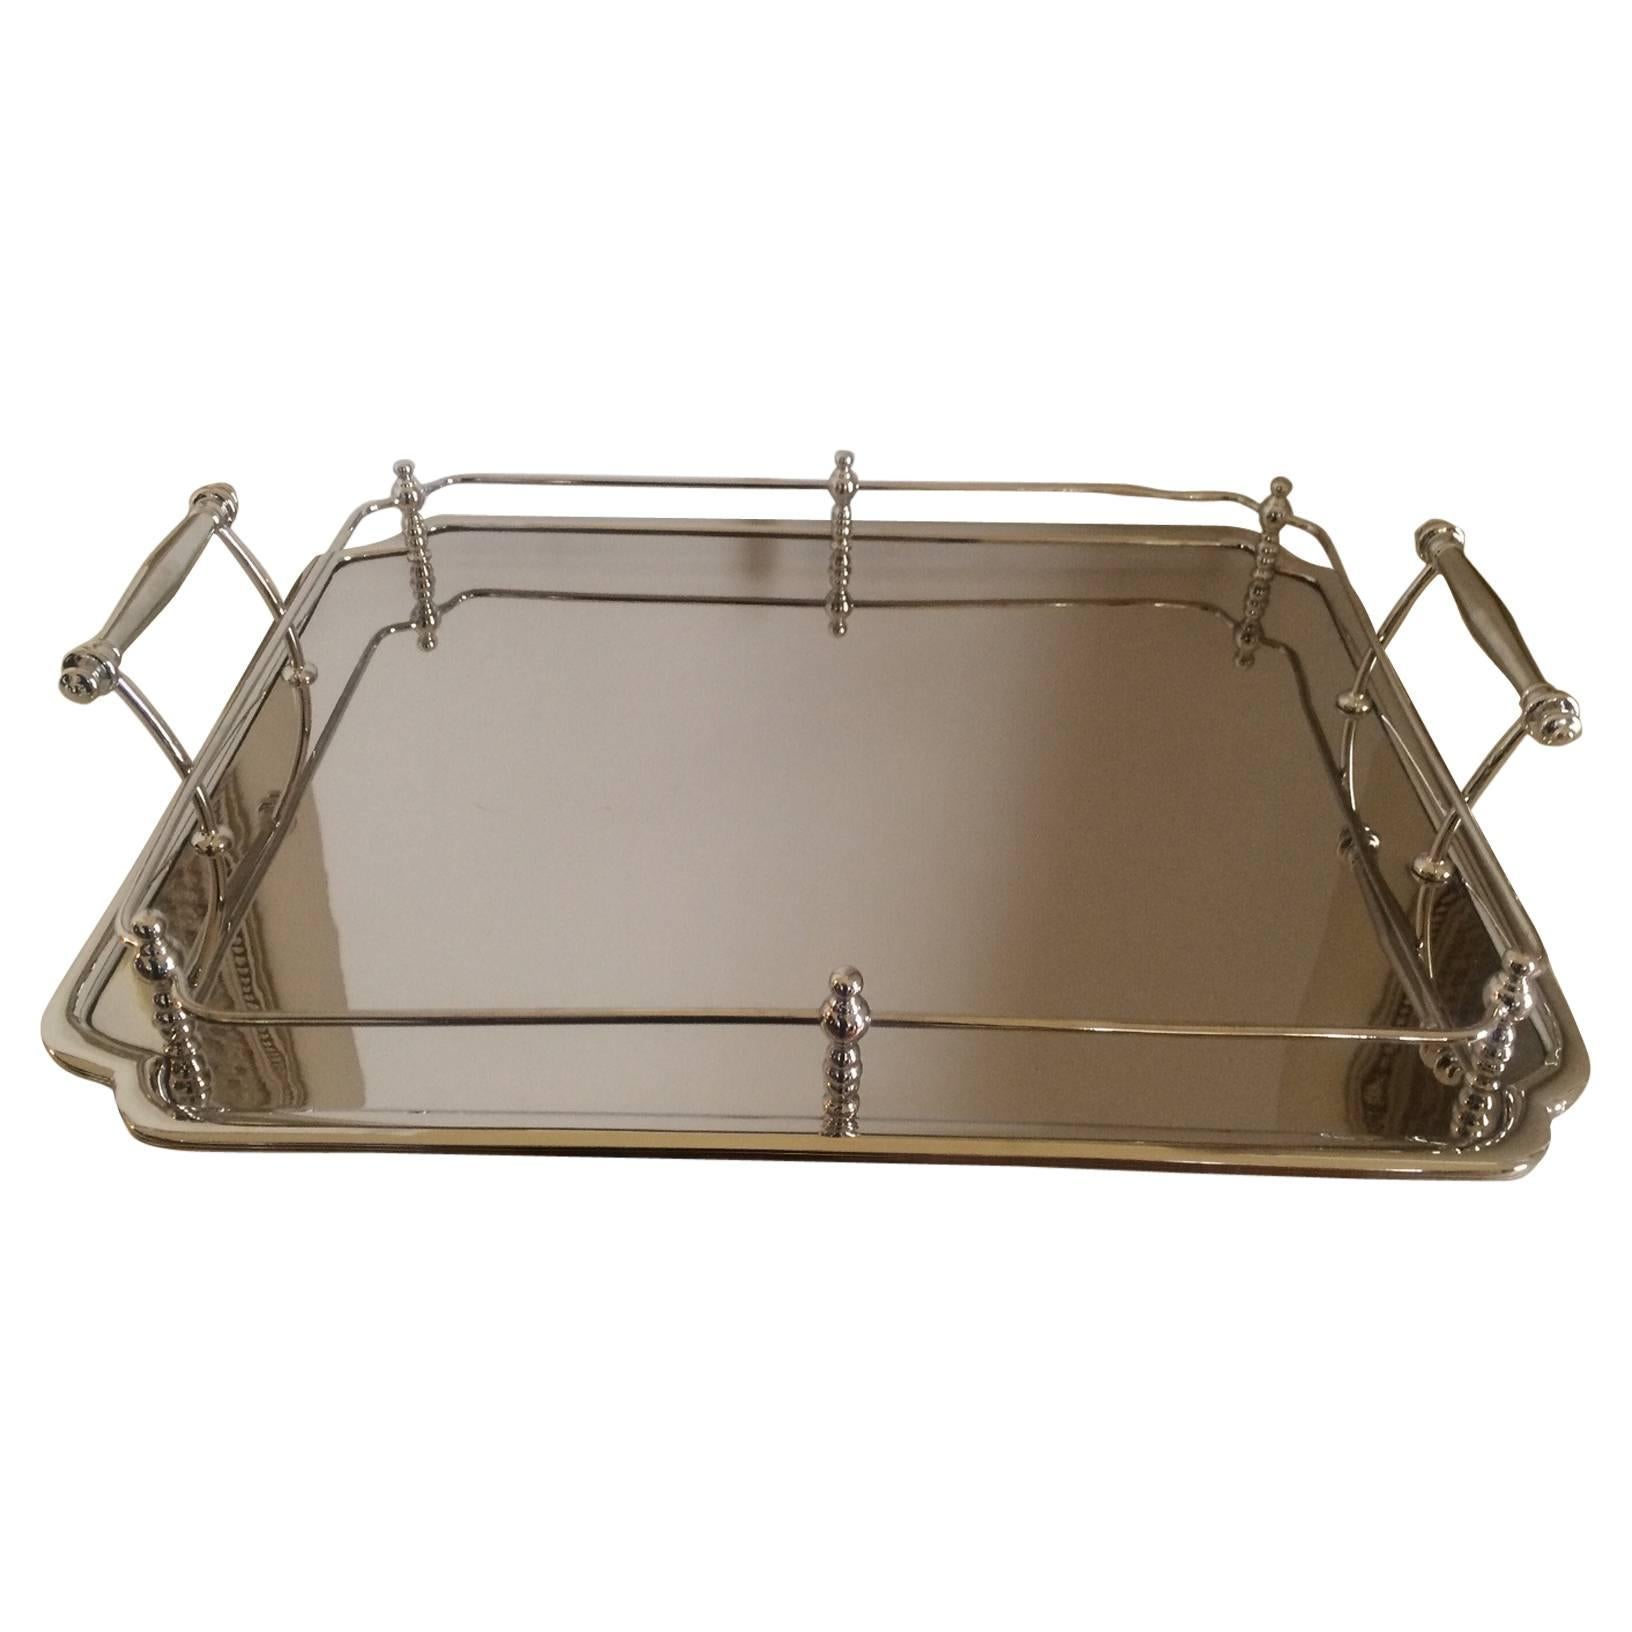 Nickel Plated Serving, Bar Tray with Gallery